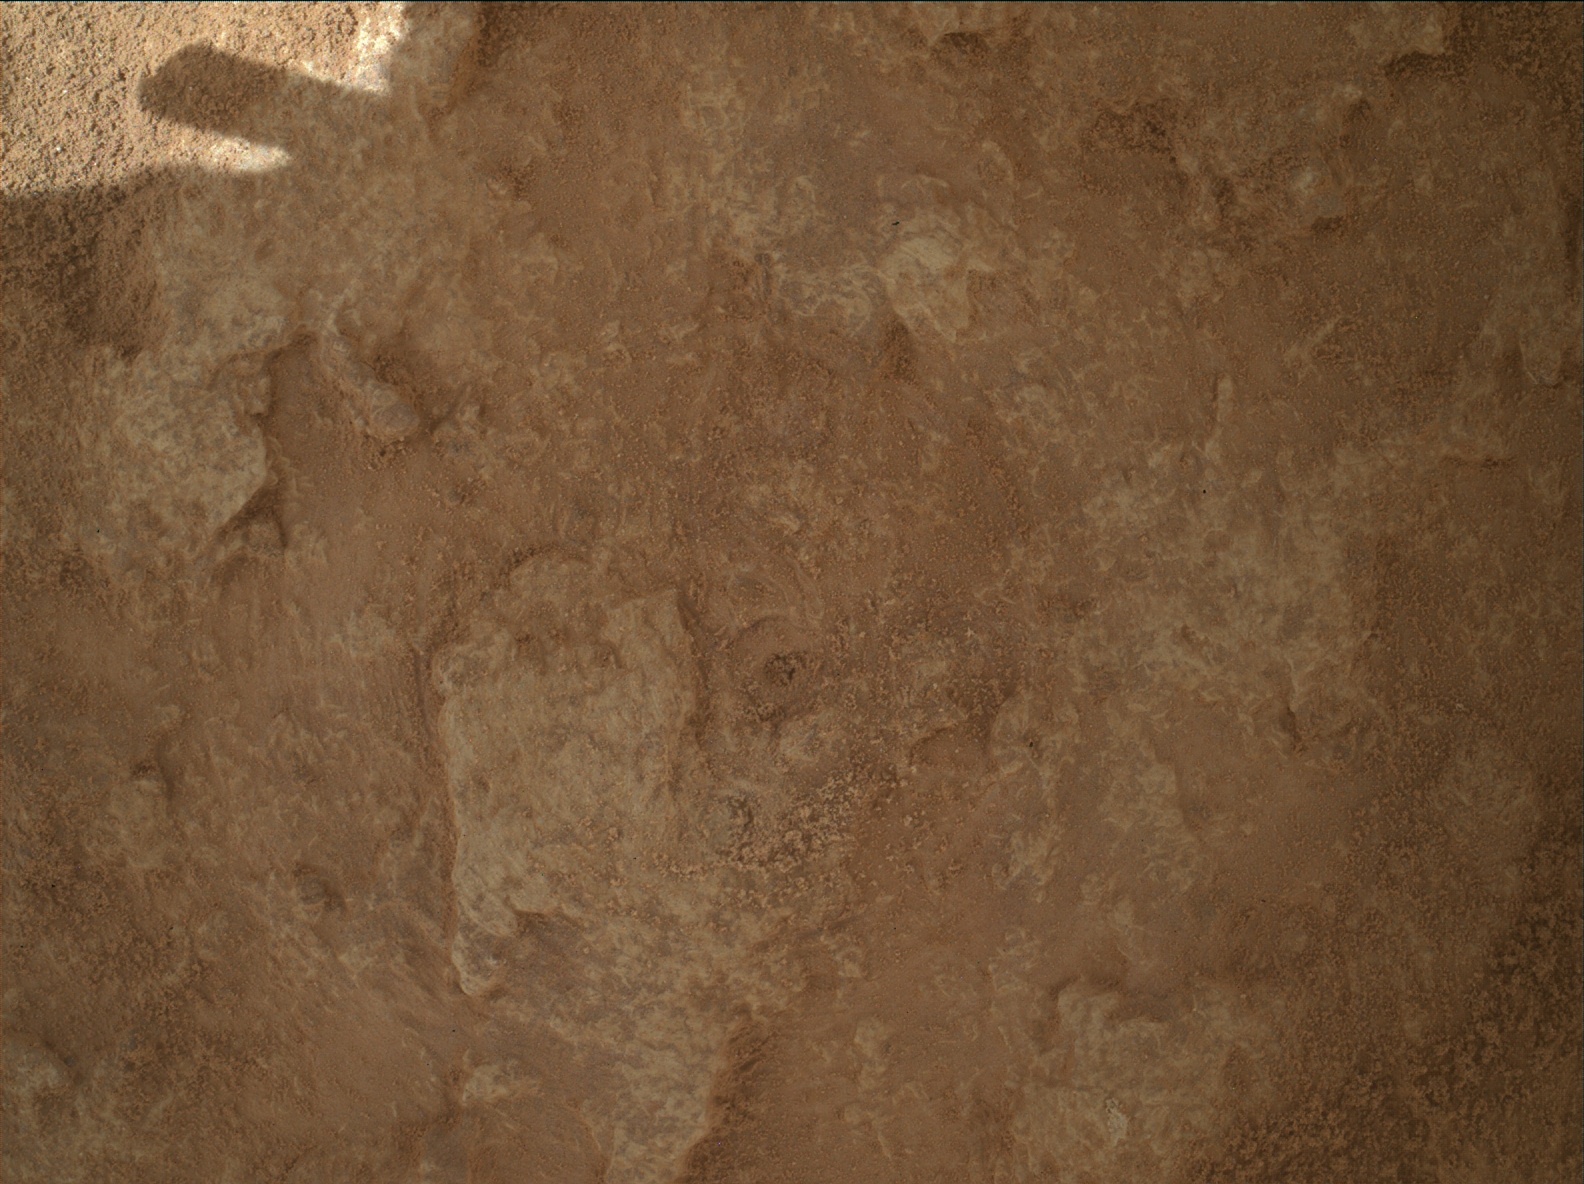 Nasa's Mars rover Curiosity acquired this image using its Mars Hand Lens Imager (MAHLI) on Sol 3708